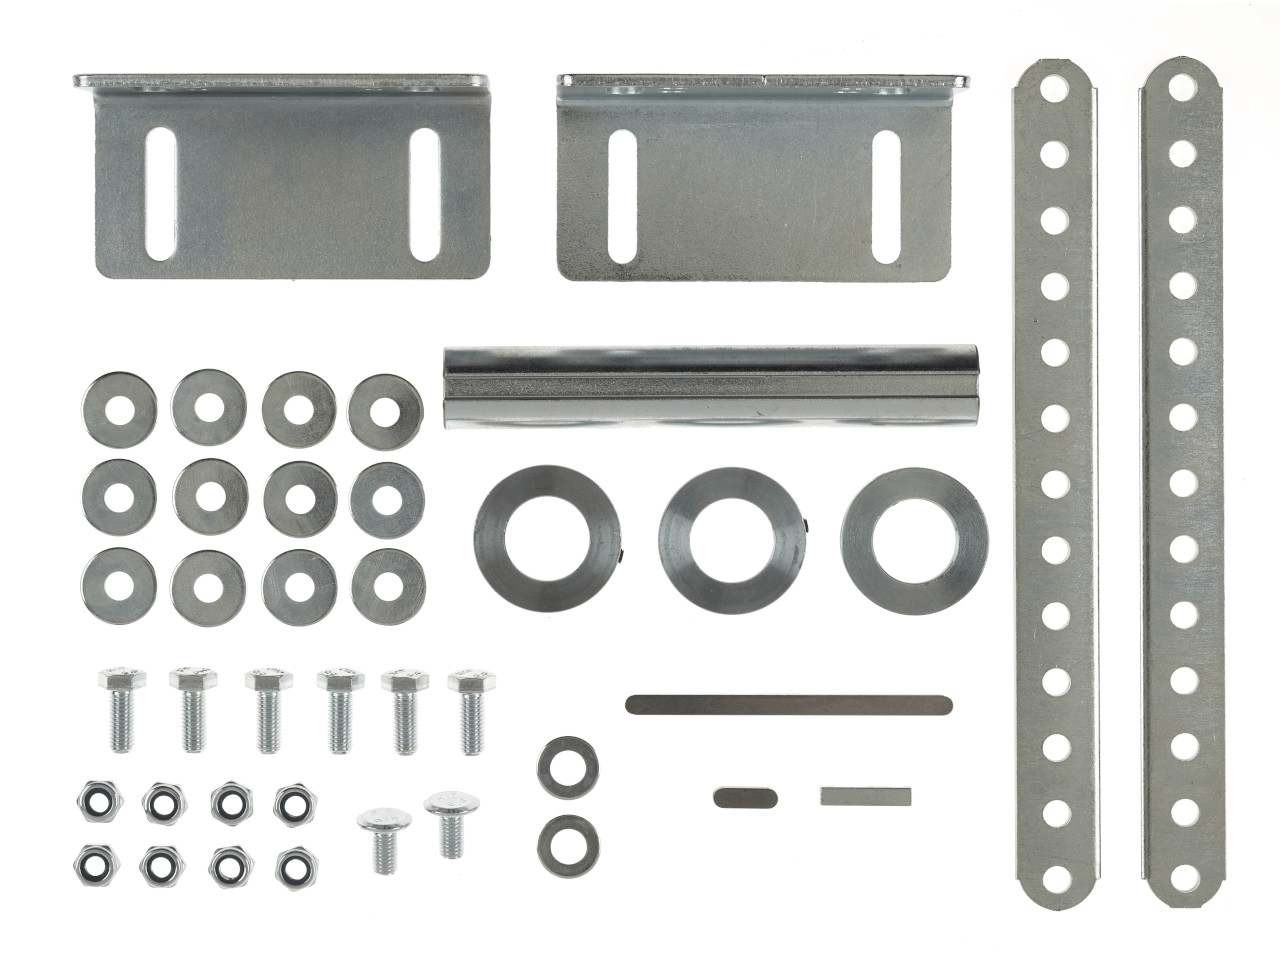 Mounting kit for axle chain drives with standard hollow shaft 25.4mm